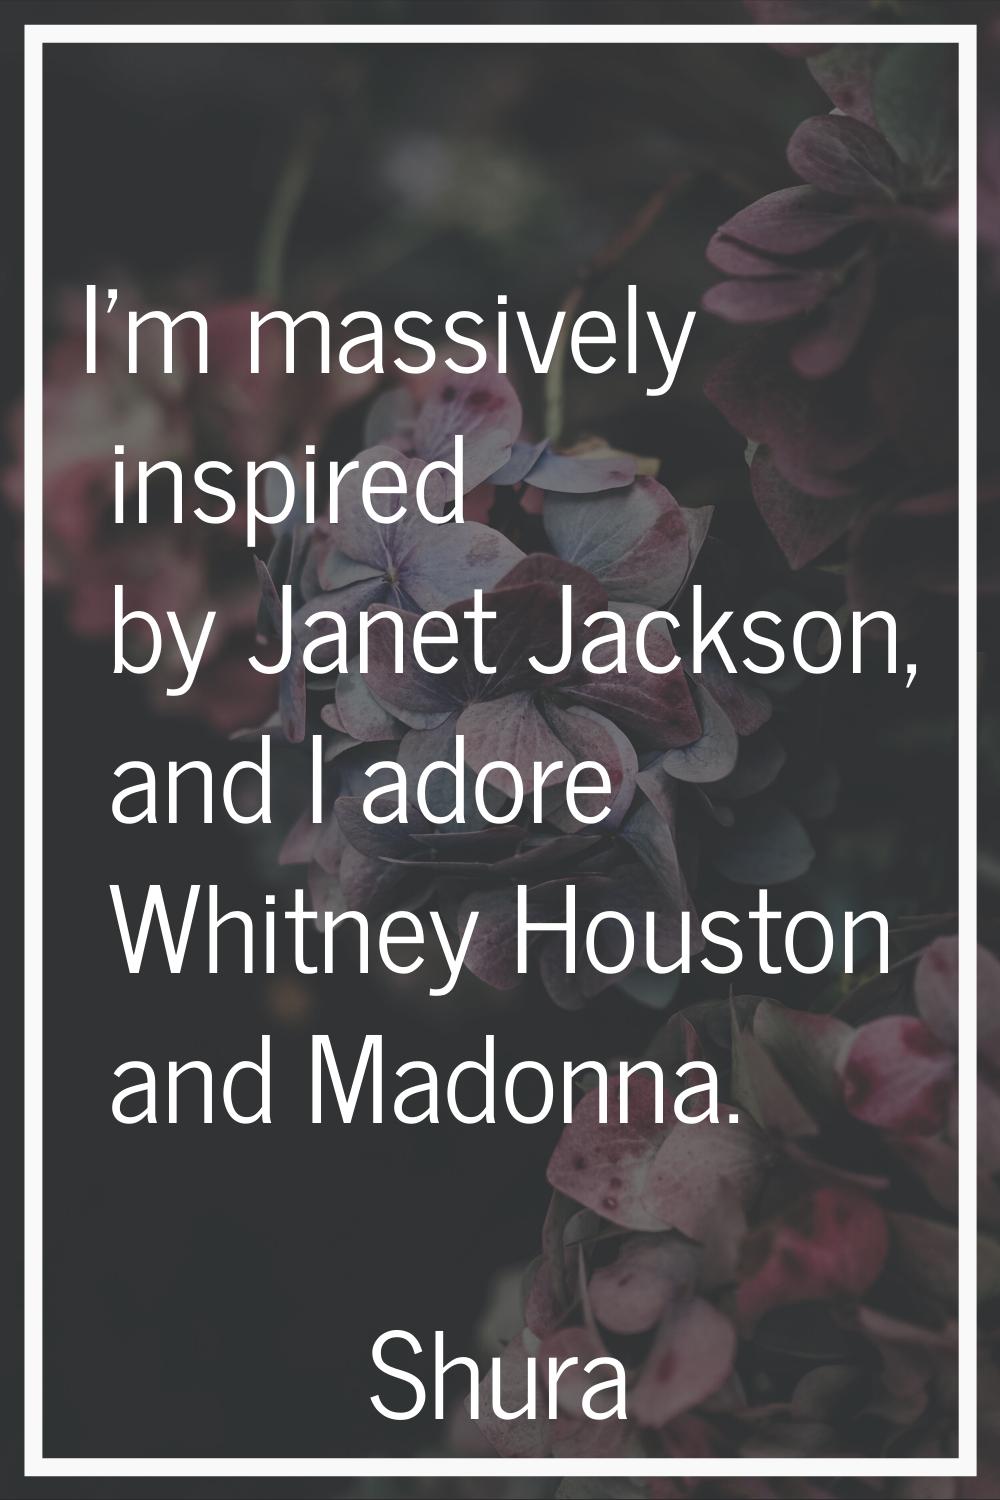 I'm massively inspired by Janet Jackson, and I adore Whitney Houston and Madonna.